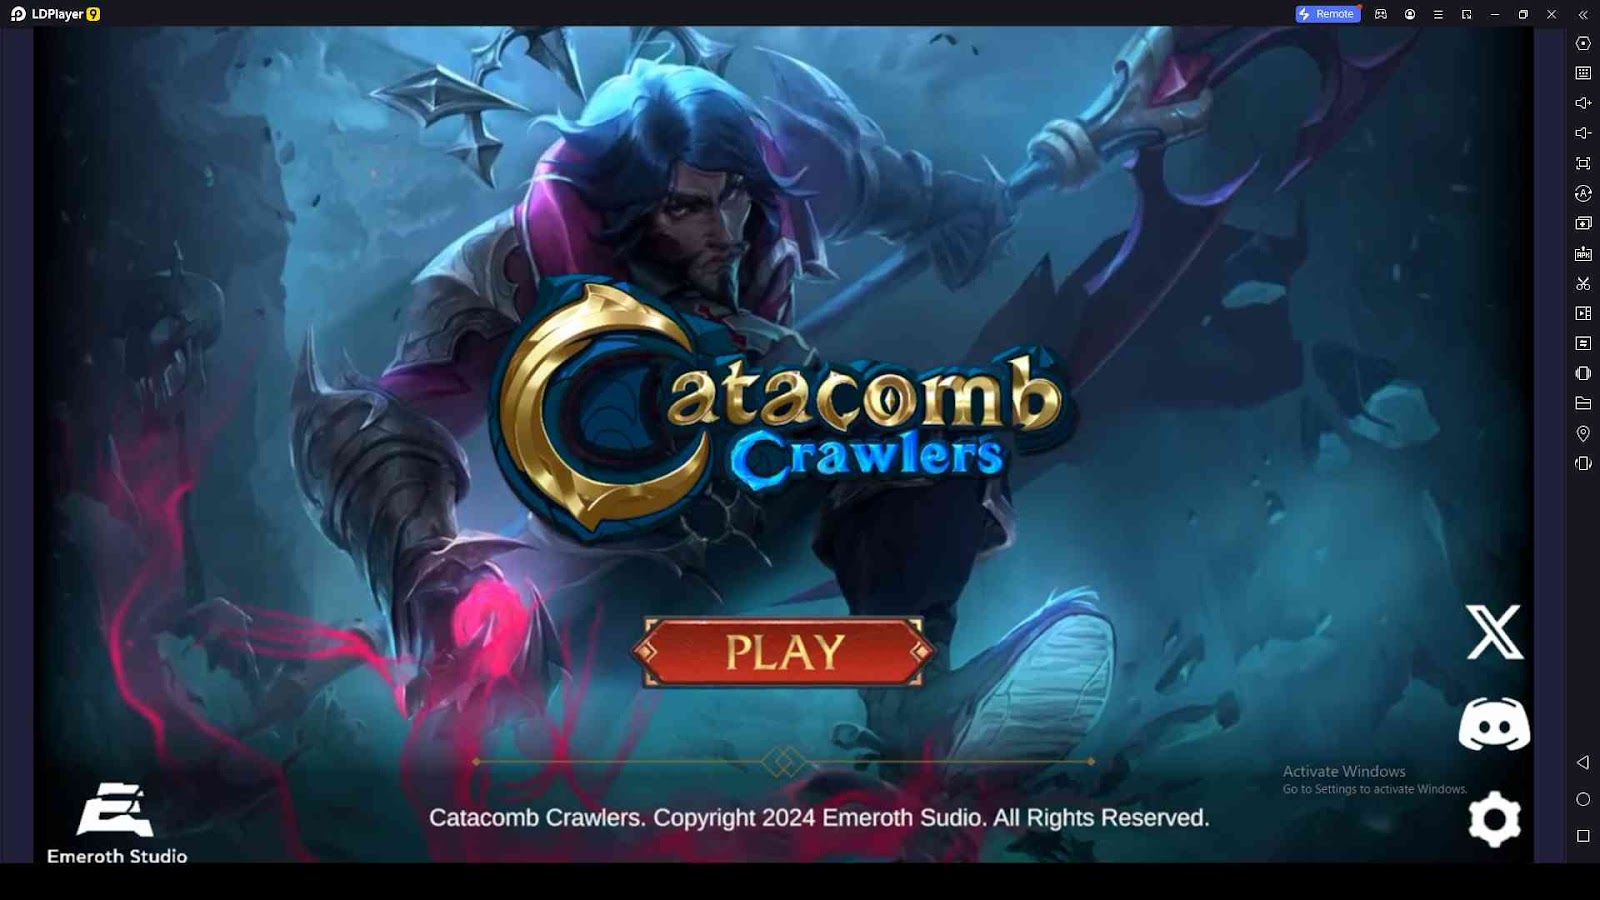 Catacomb Crawlers Beginner Tips and Tricks